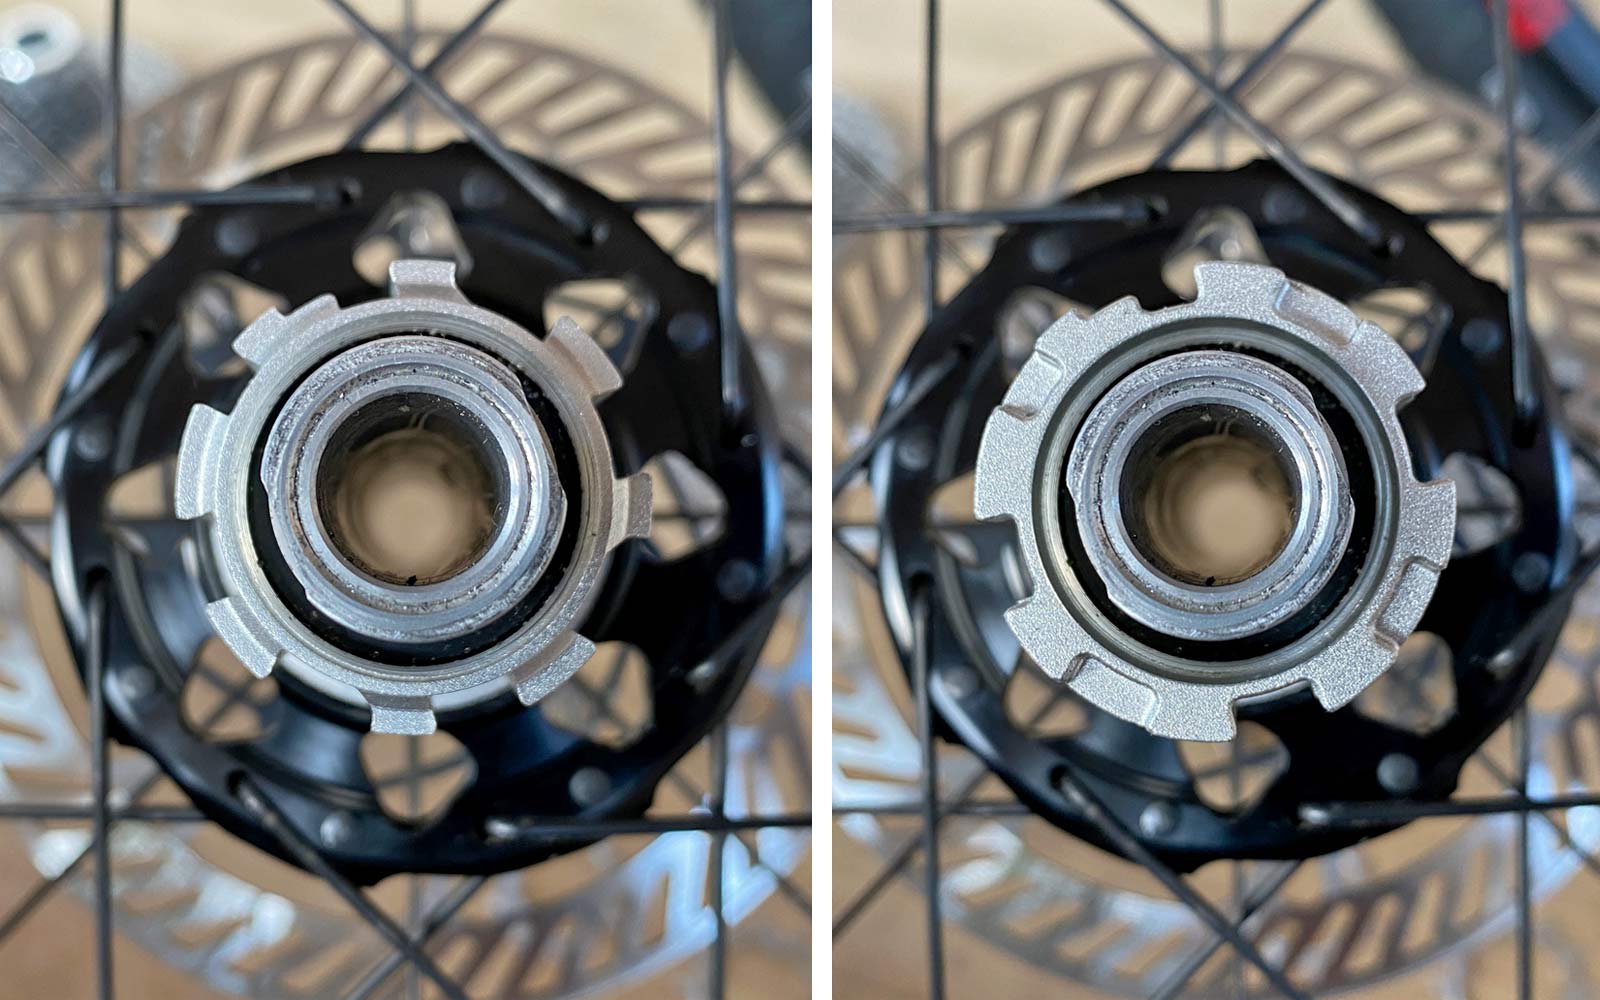 Campagnolo N3W freehub body Tech Feature in detail, new Campy backwards compatible gravel road bike wheels, toothed interface